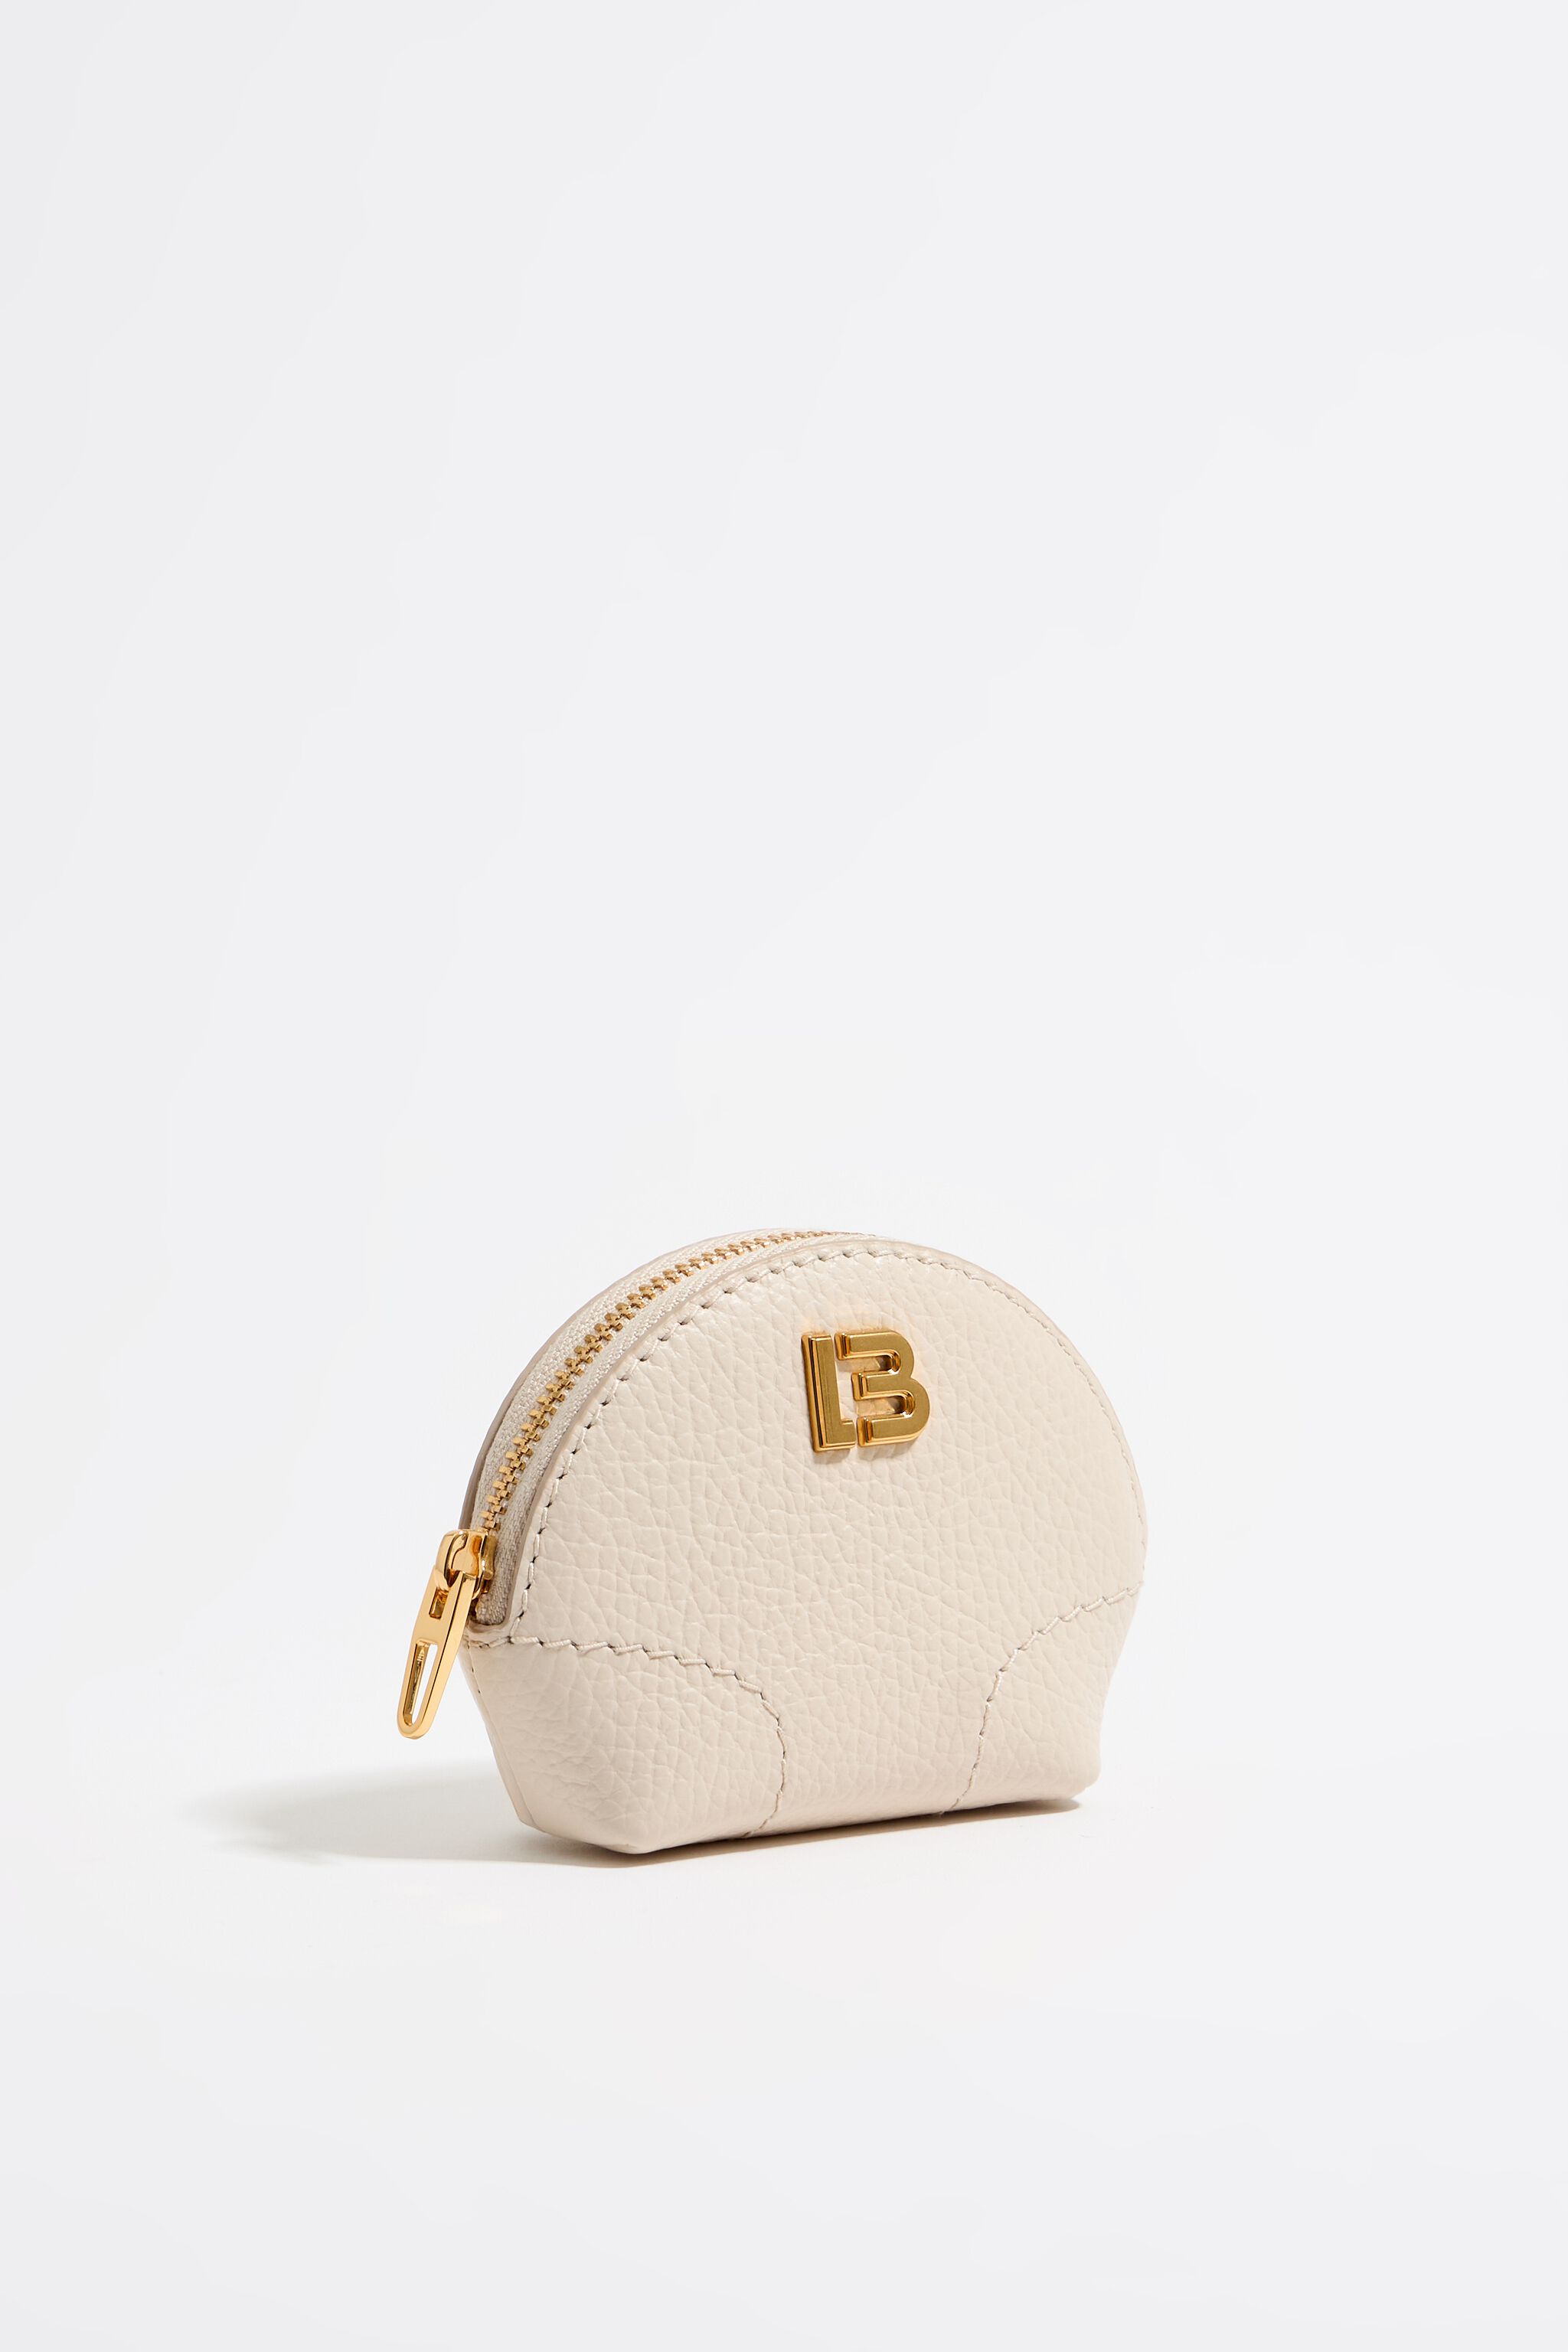 Buy Forever 21 White Textured Coin Pouch Online At Best Price @ Tata CLiQ